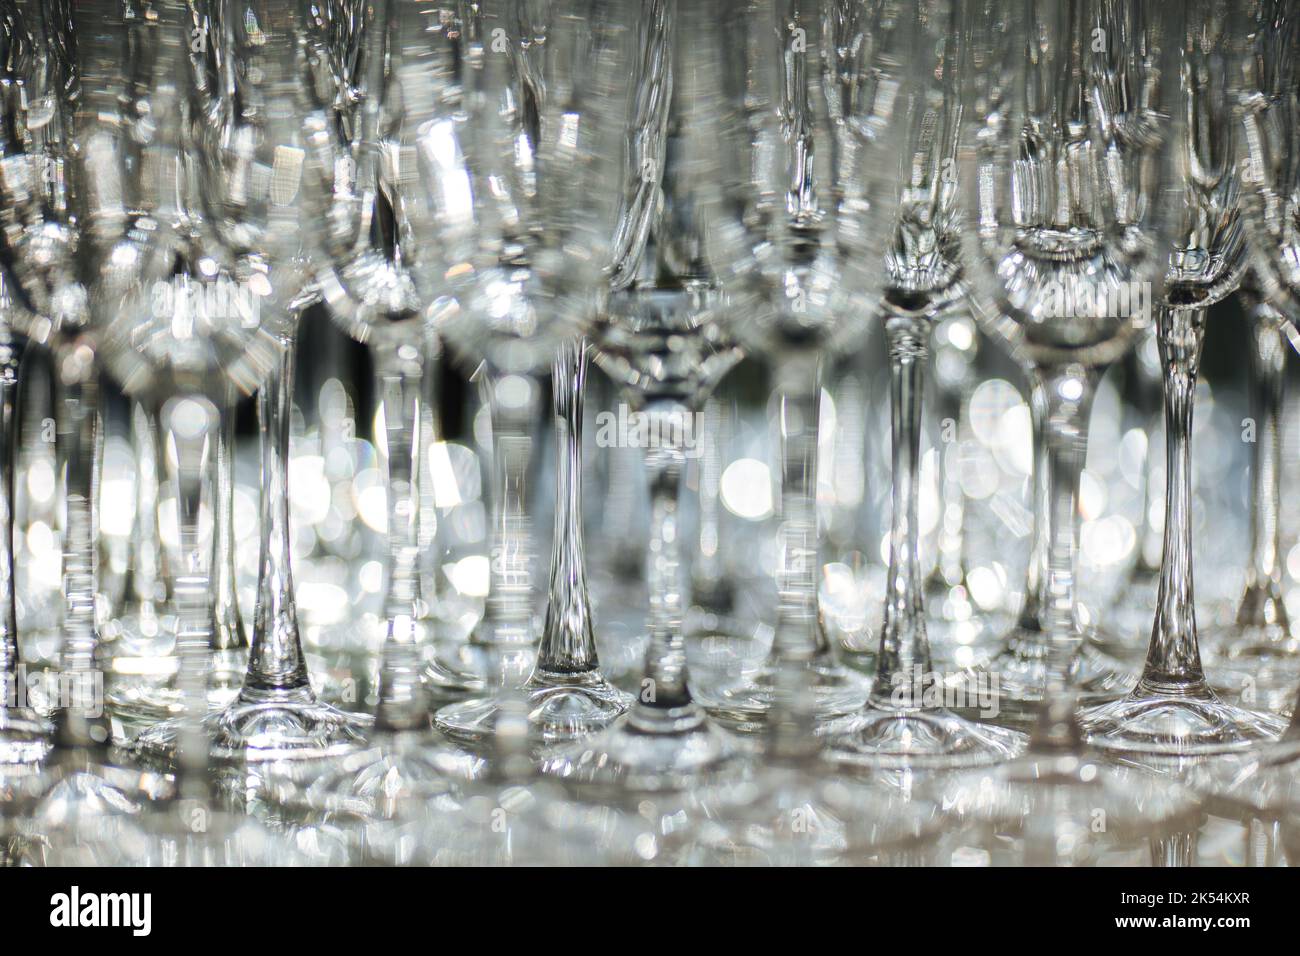 Group of empty and transparent champagne glasses in a restaurant. Clean glasses on a table prepared by the bartender for champagne. Catering for the event preparation, empty glasses for drink. Stock Photo